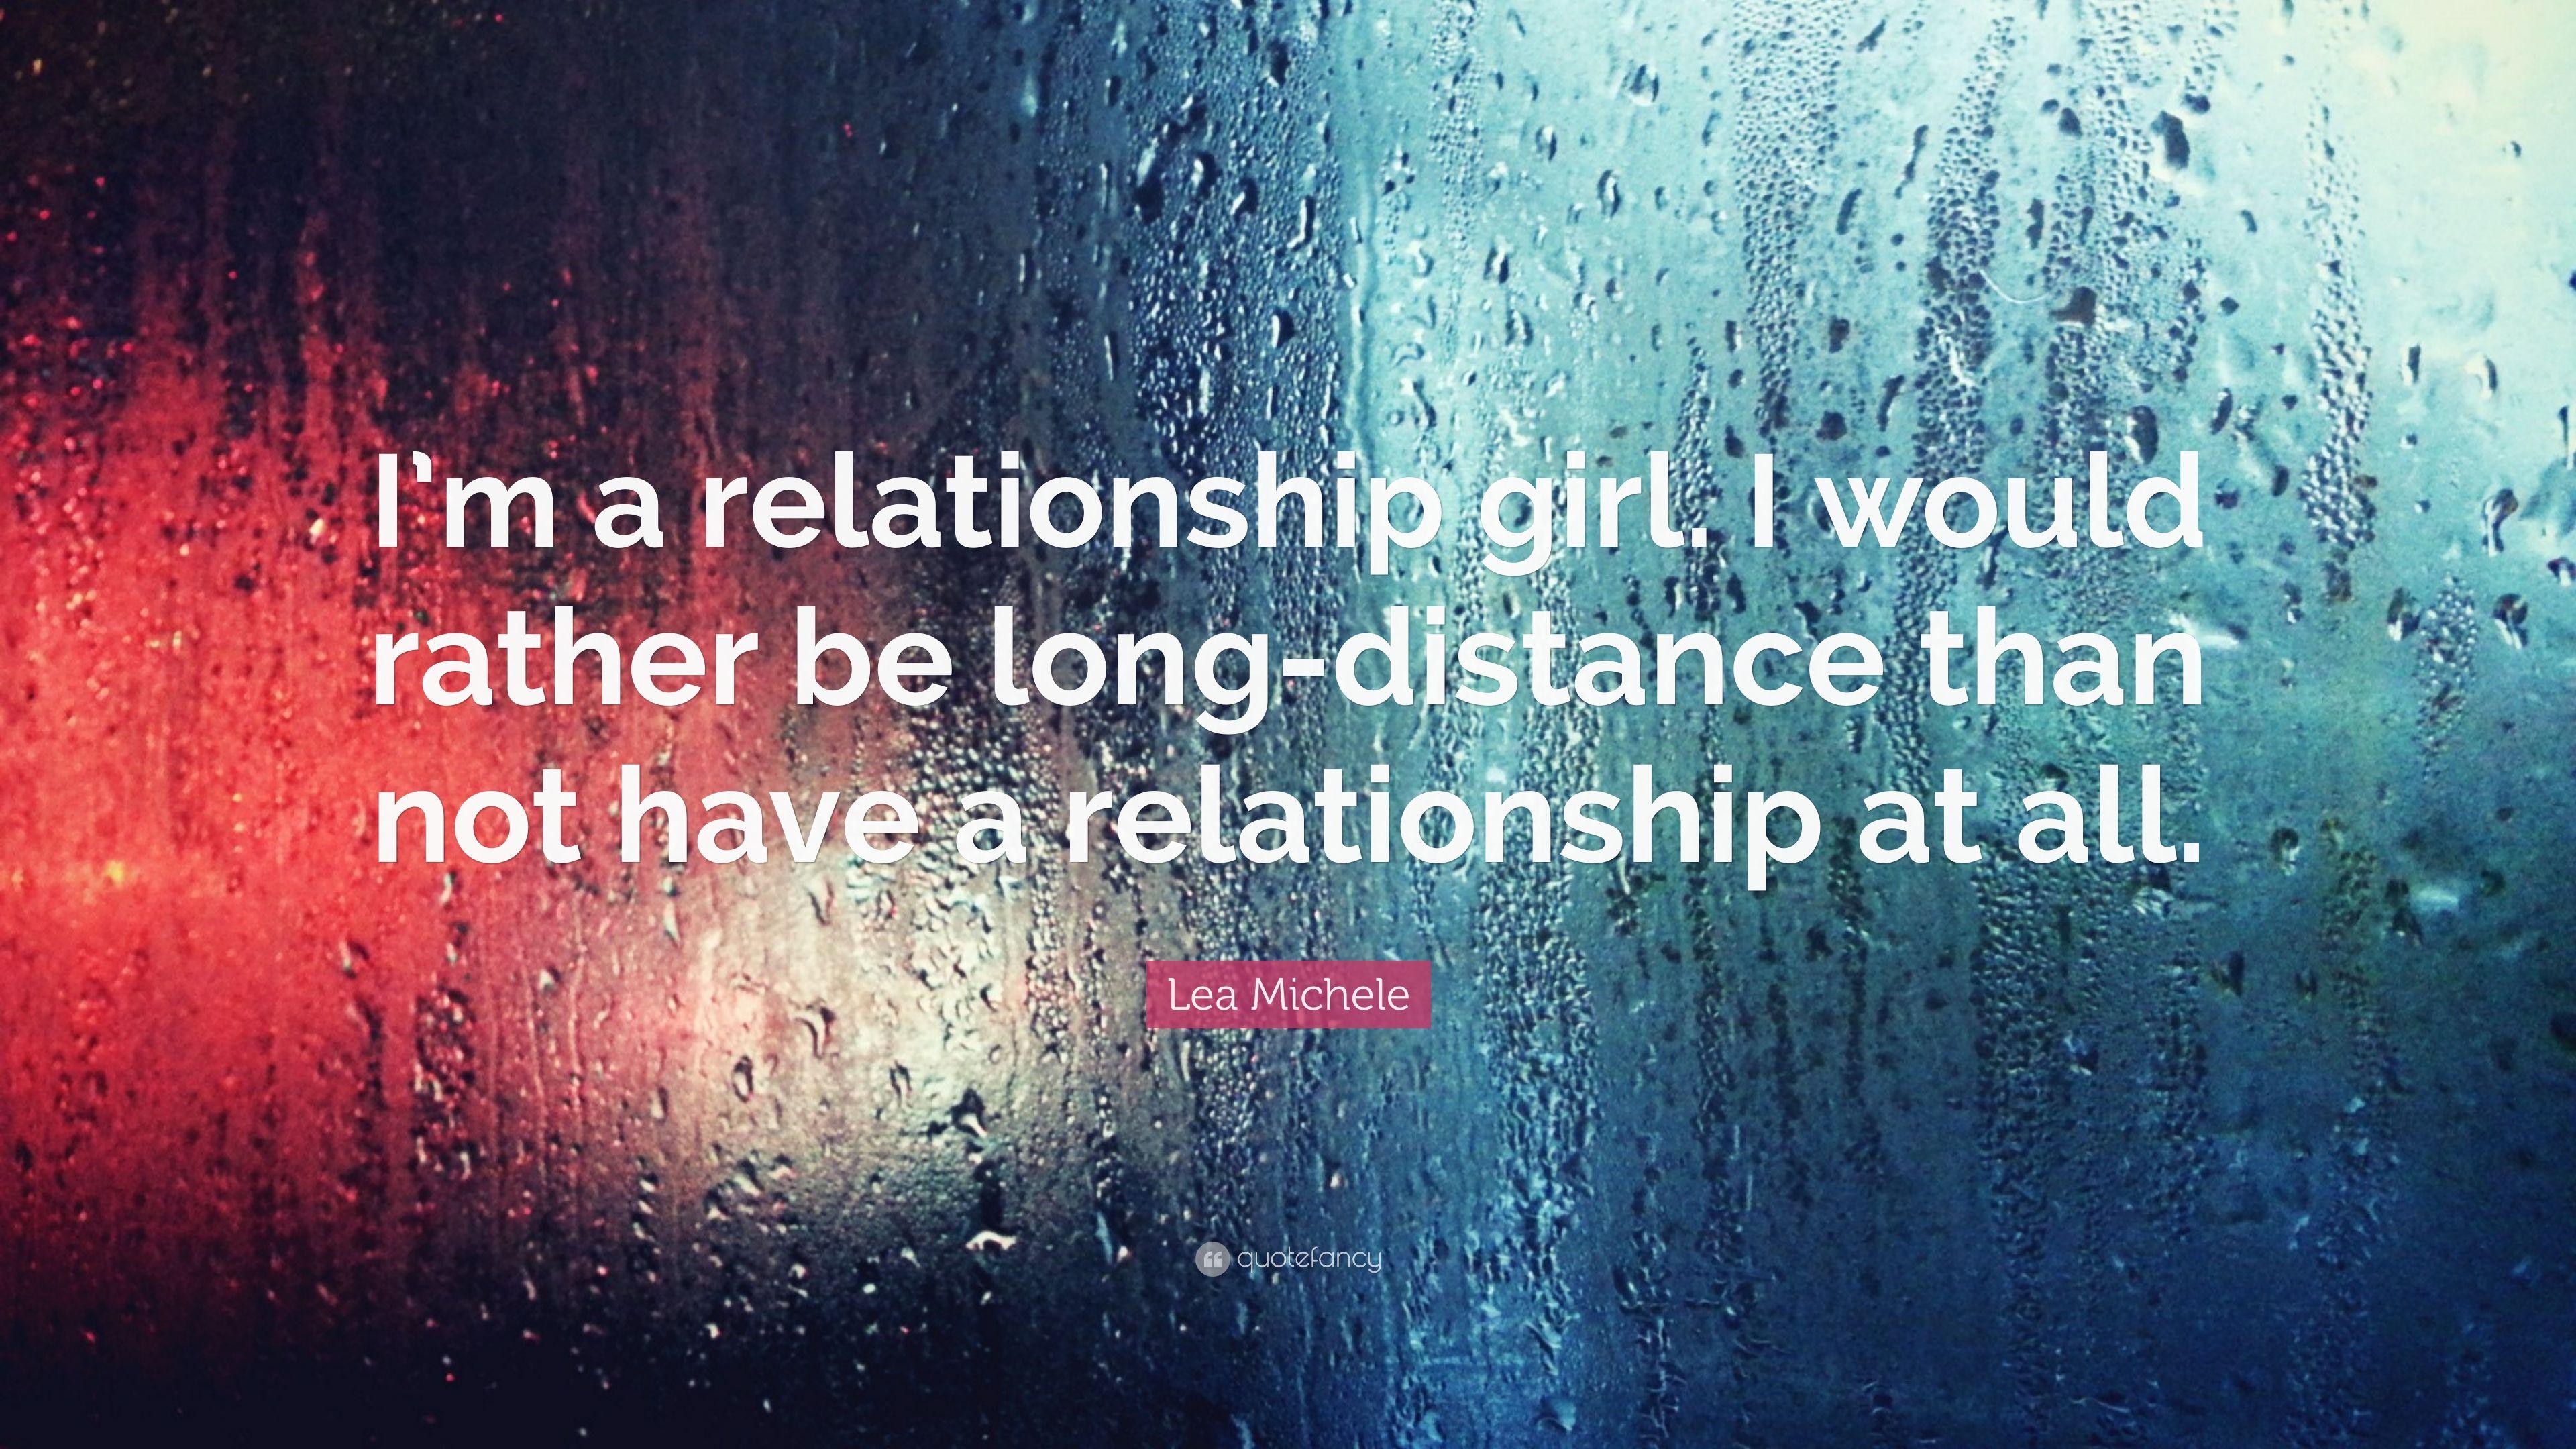 Lea Michele Quote: “I'm a relationship girl. I would rather